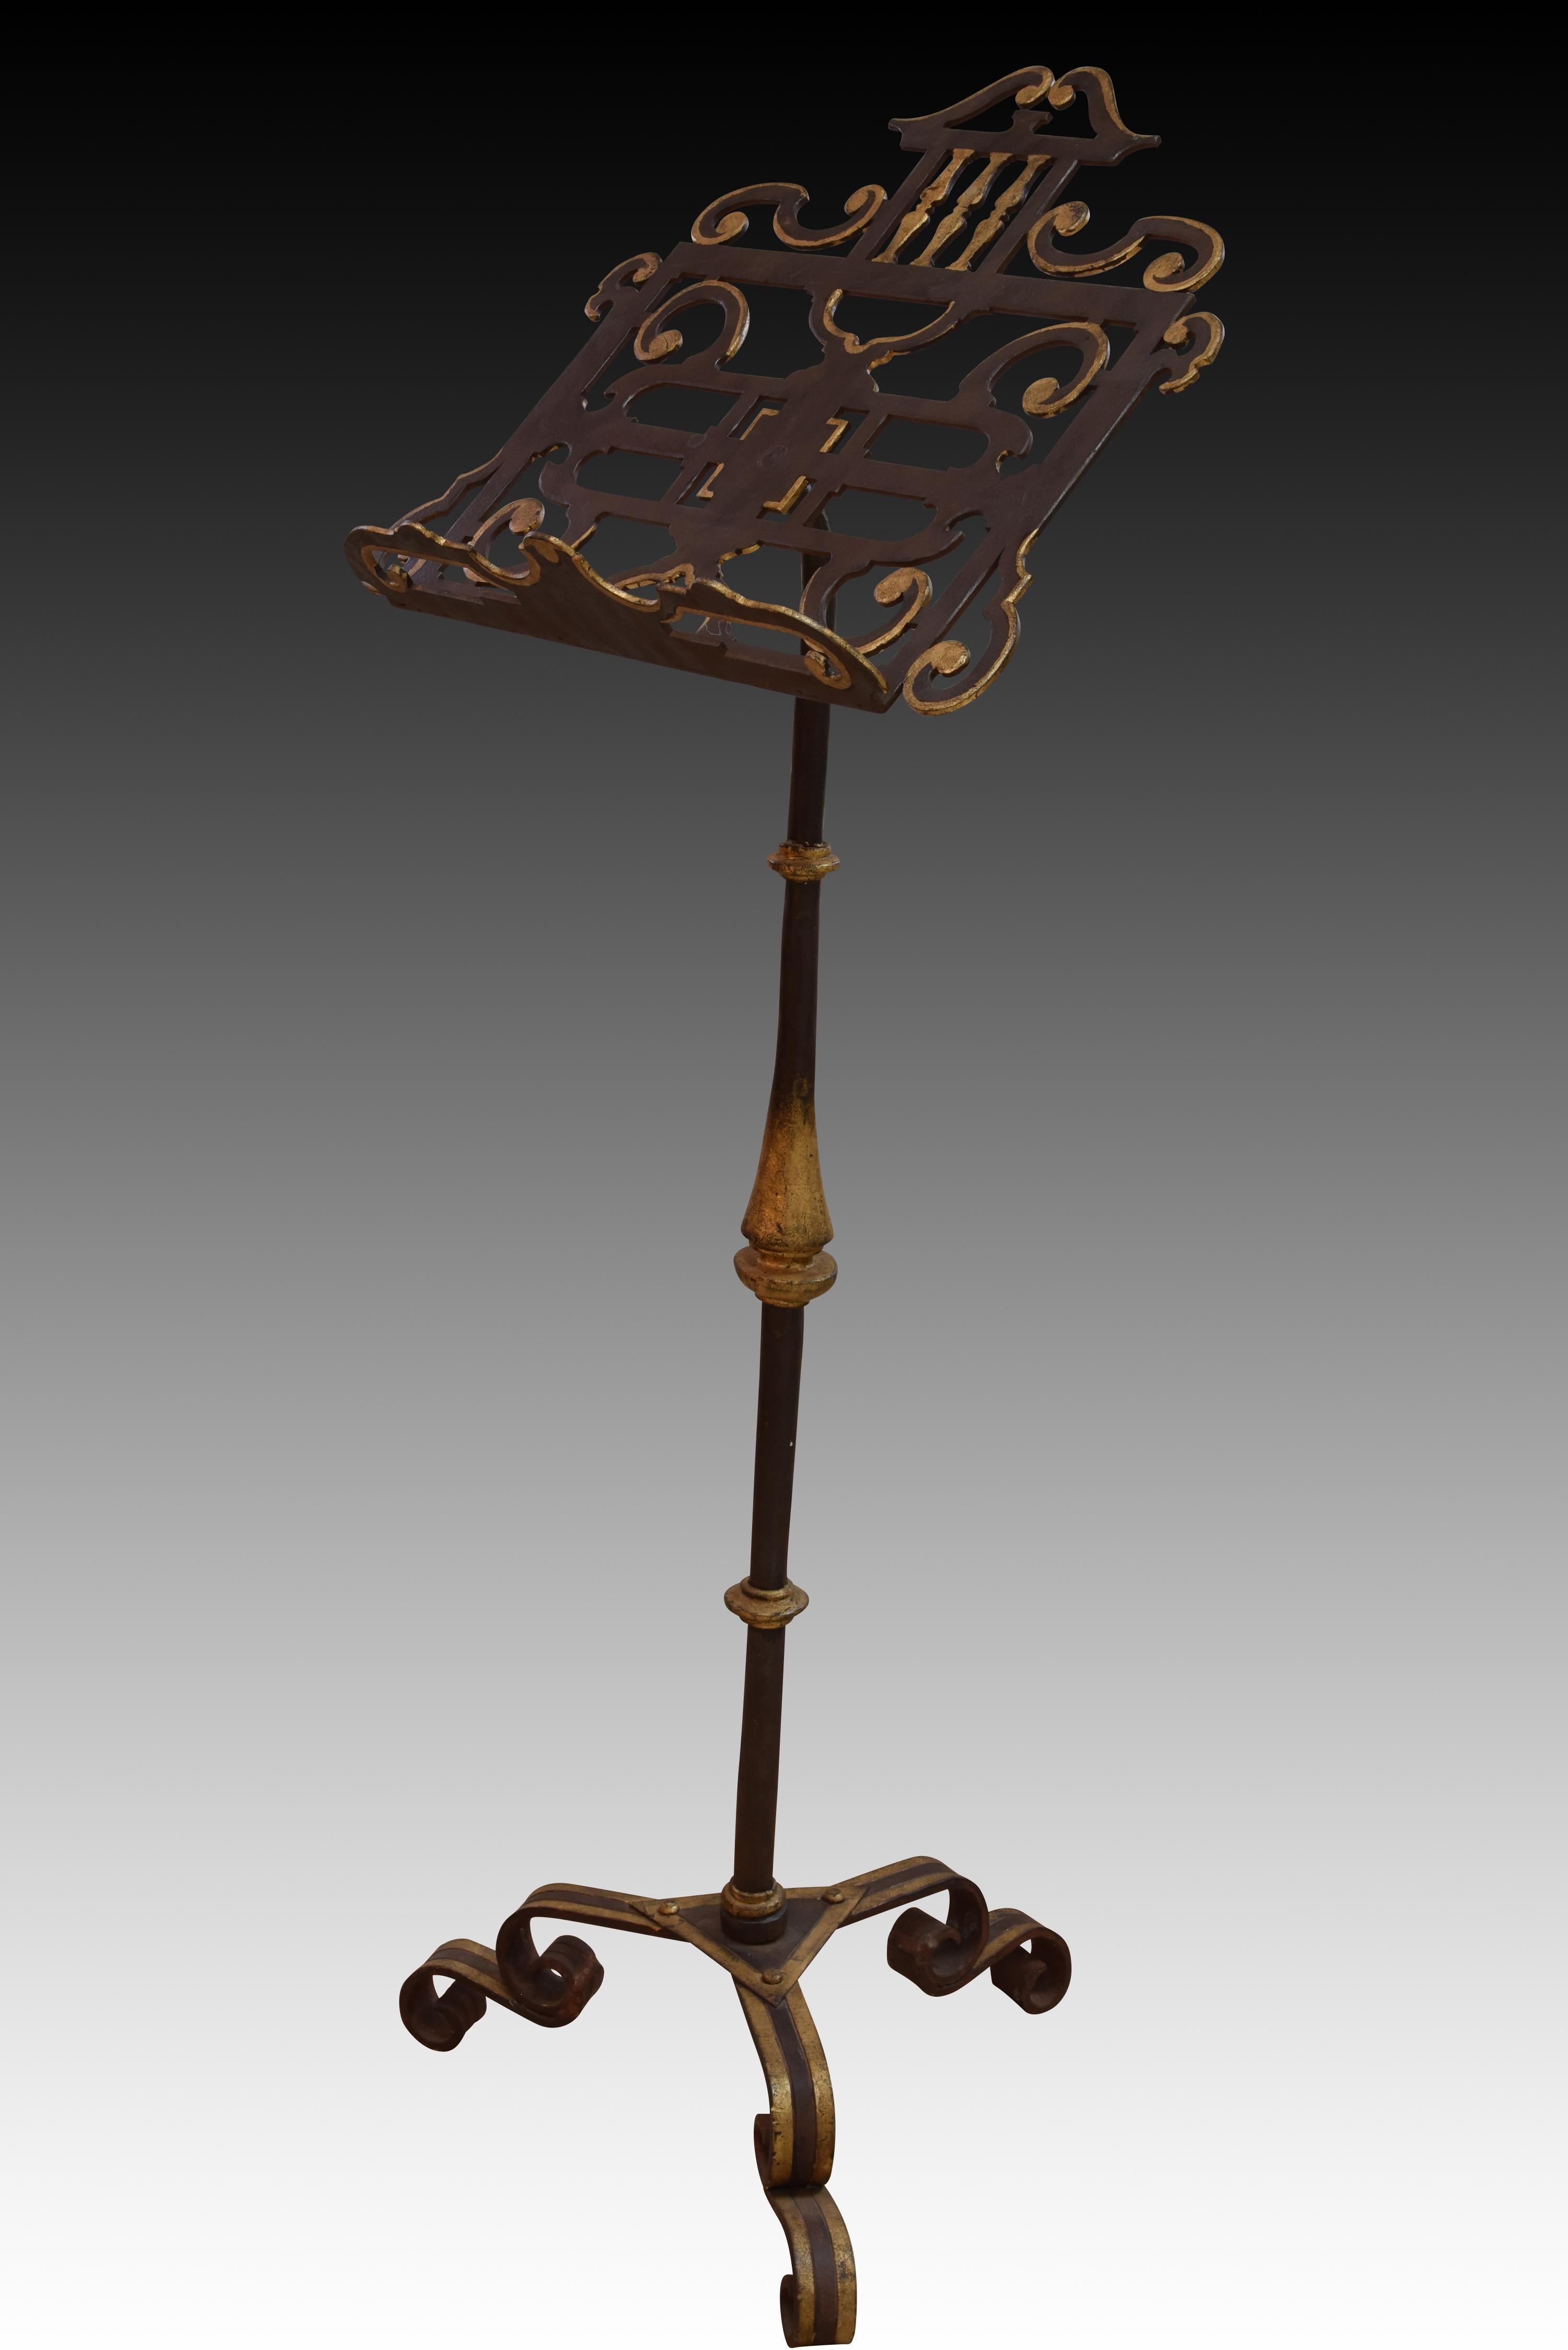 Standing lectern in wrought iron. Twentieth century. 
On three legs with volutes stands a foot decorated with balustraded shapes and a flame towards the center, which supports and raises the lectern, which stands out for its simplified architectural